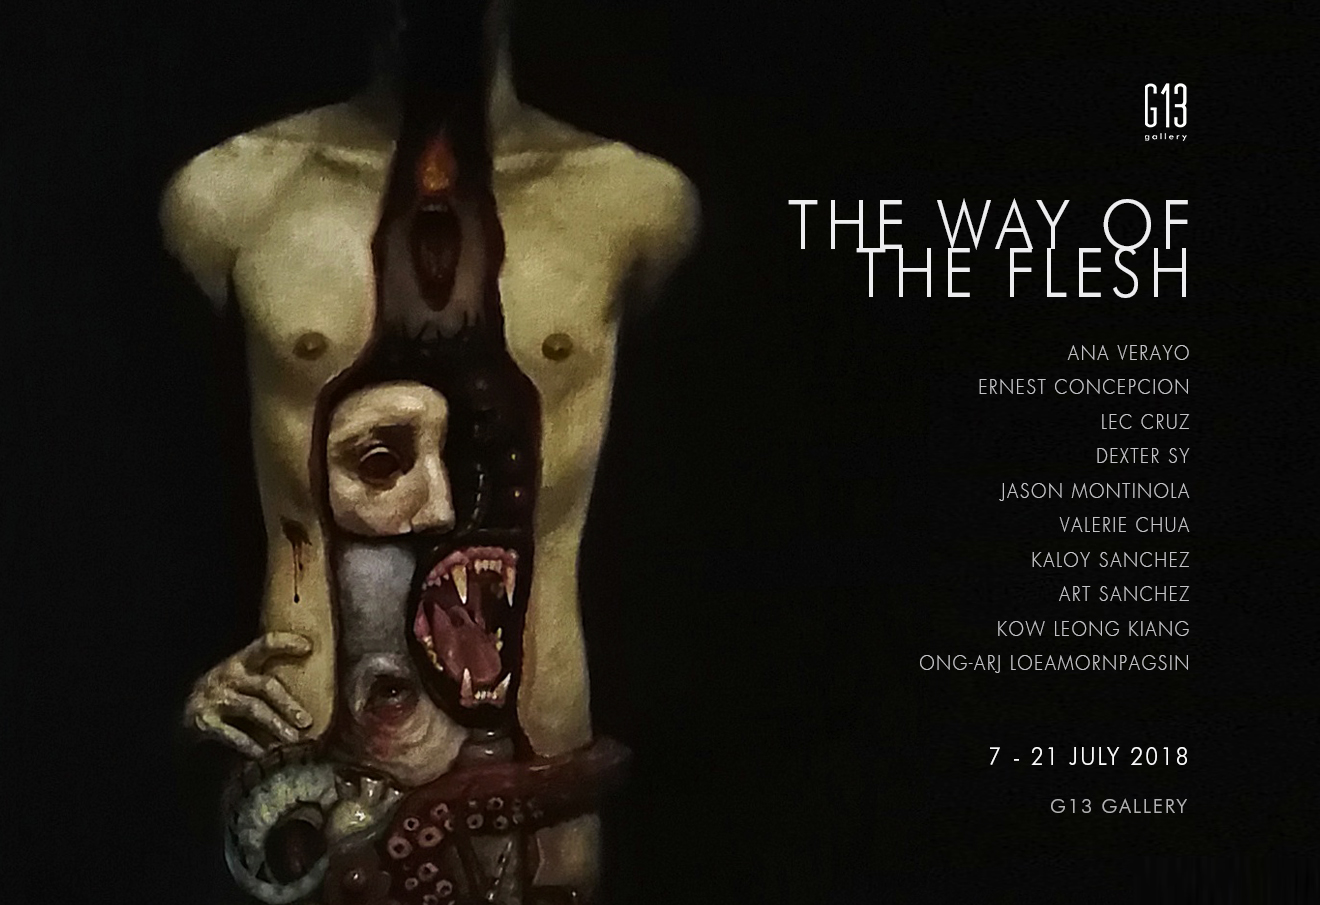 The Way of The Flesh